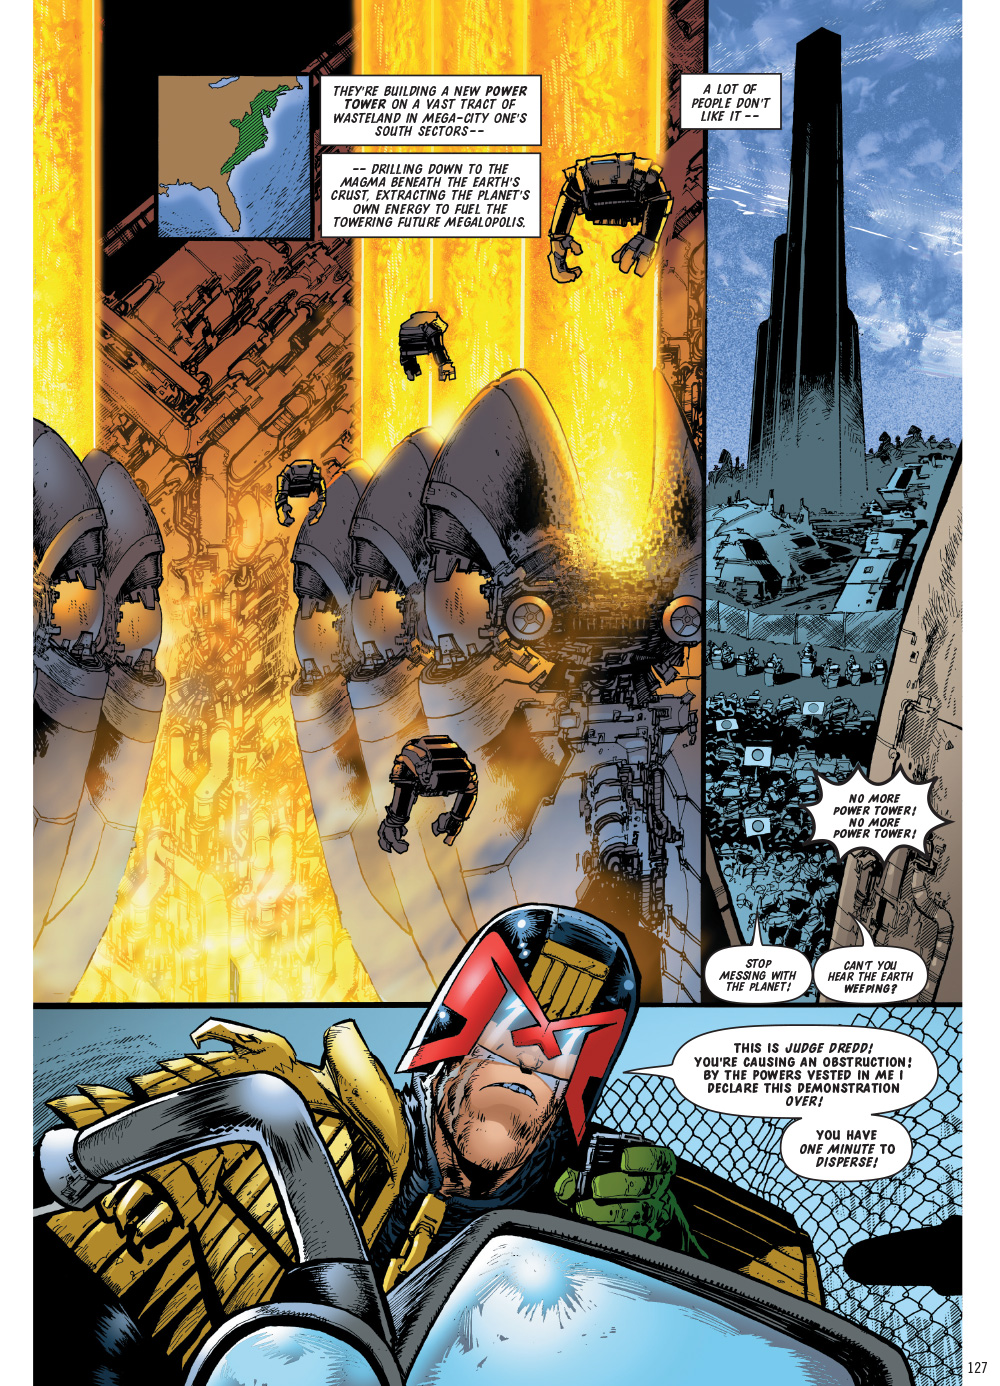 Judge Dredd: The Complete Case Files 36 review